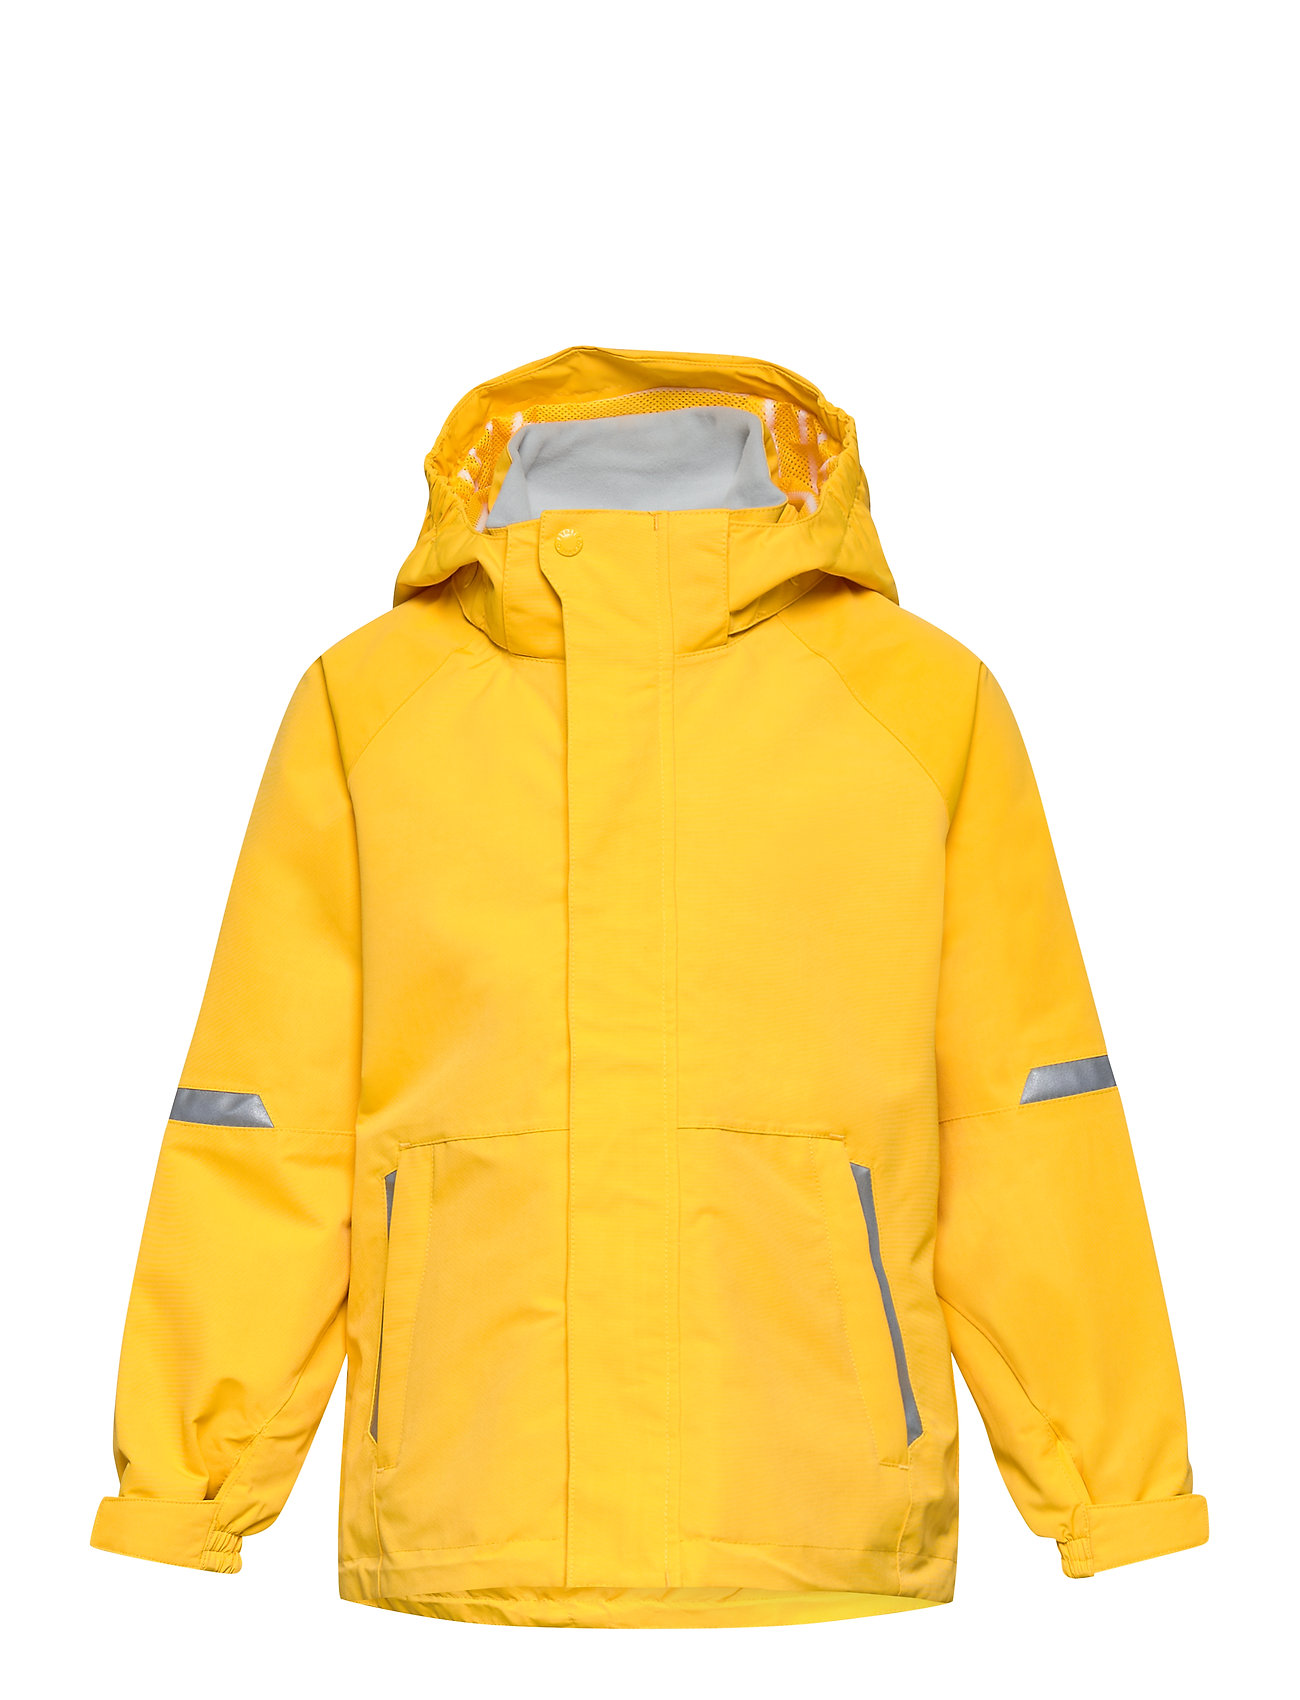 Jacket Shell Solid Outerwear Shell Clothing Shell Jacket Keltainen Polarn O. Pyret